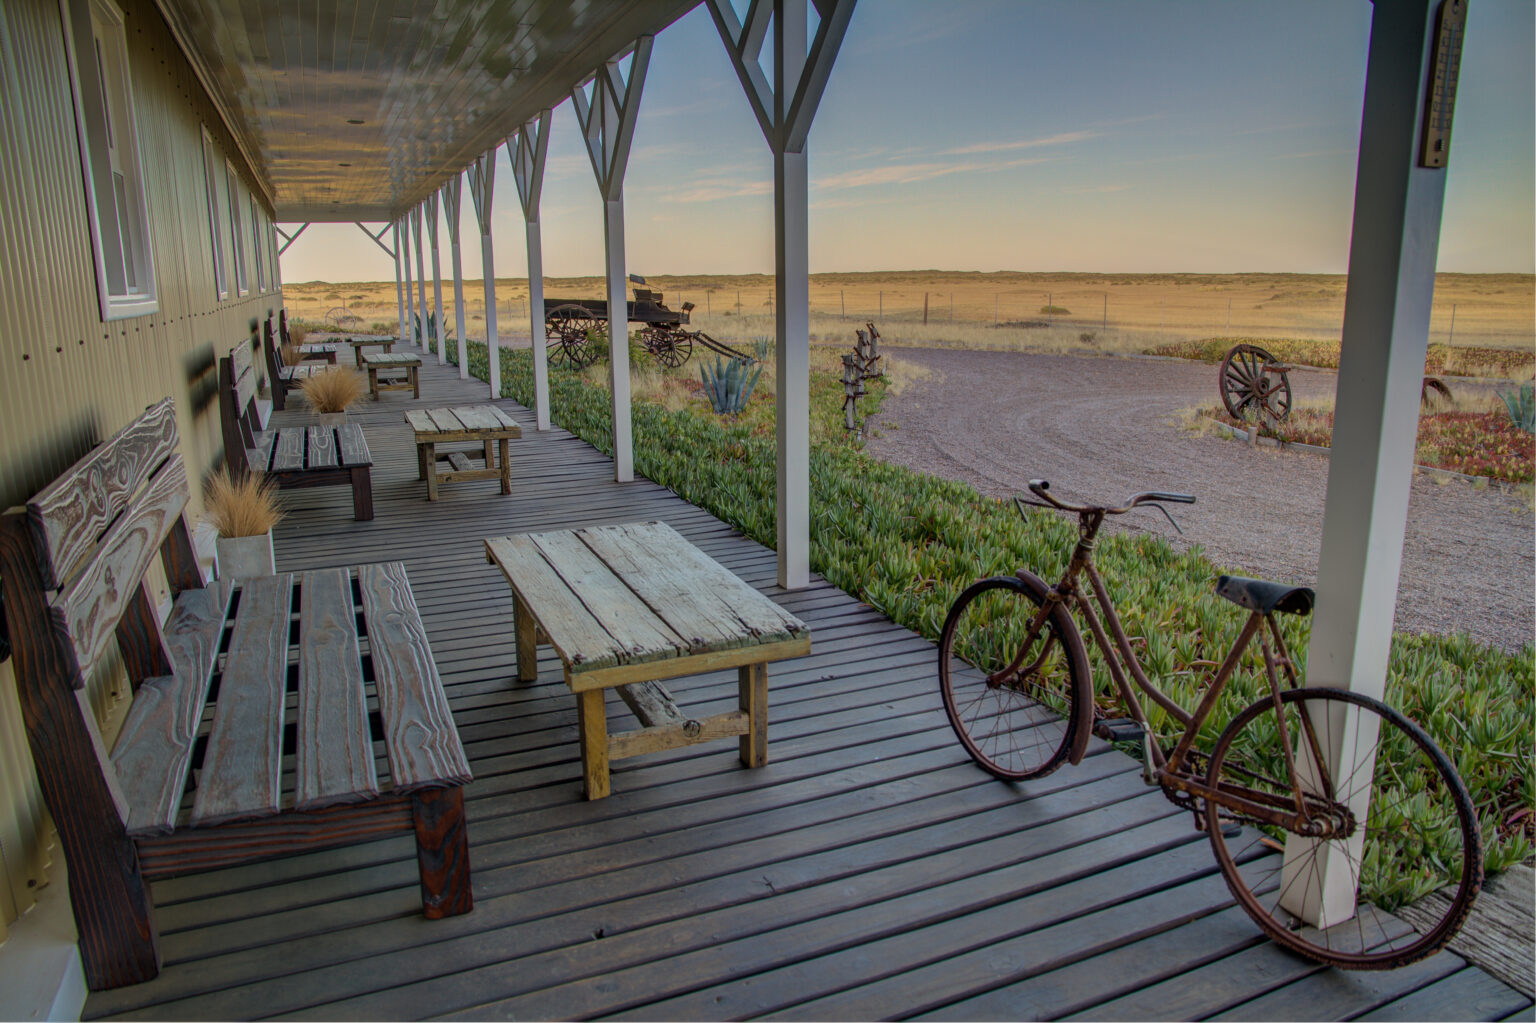 Benches and bicycles on a deck overlooking plains